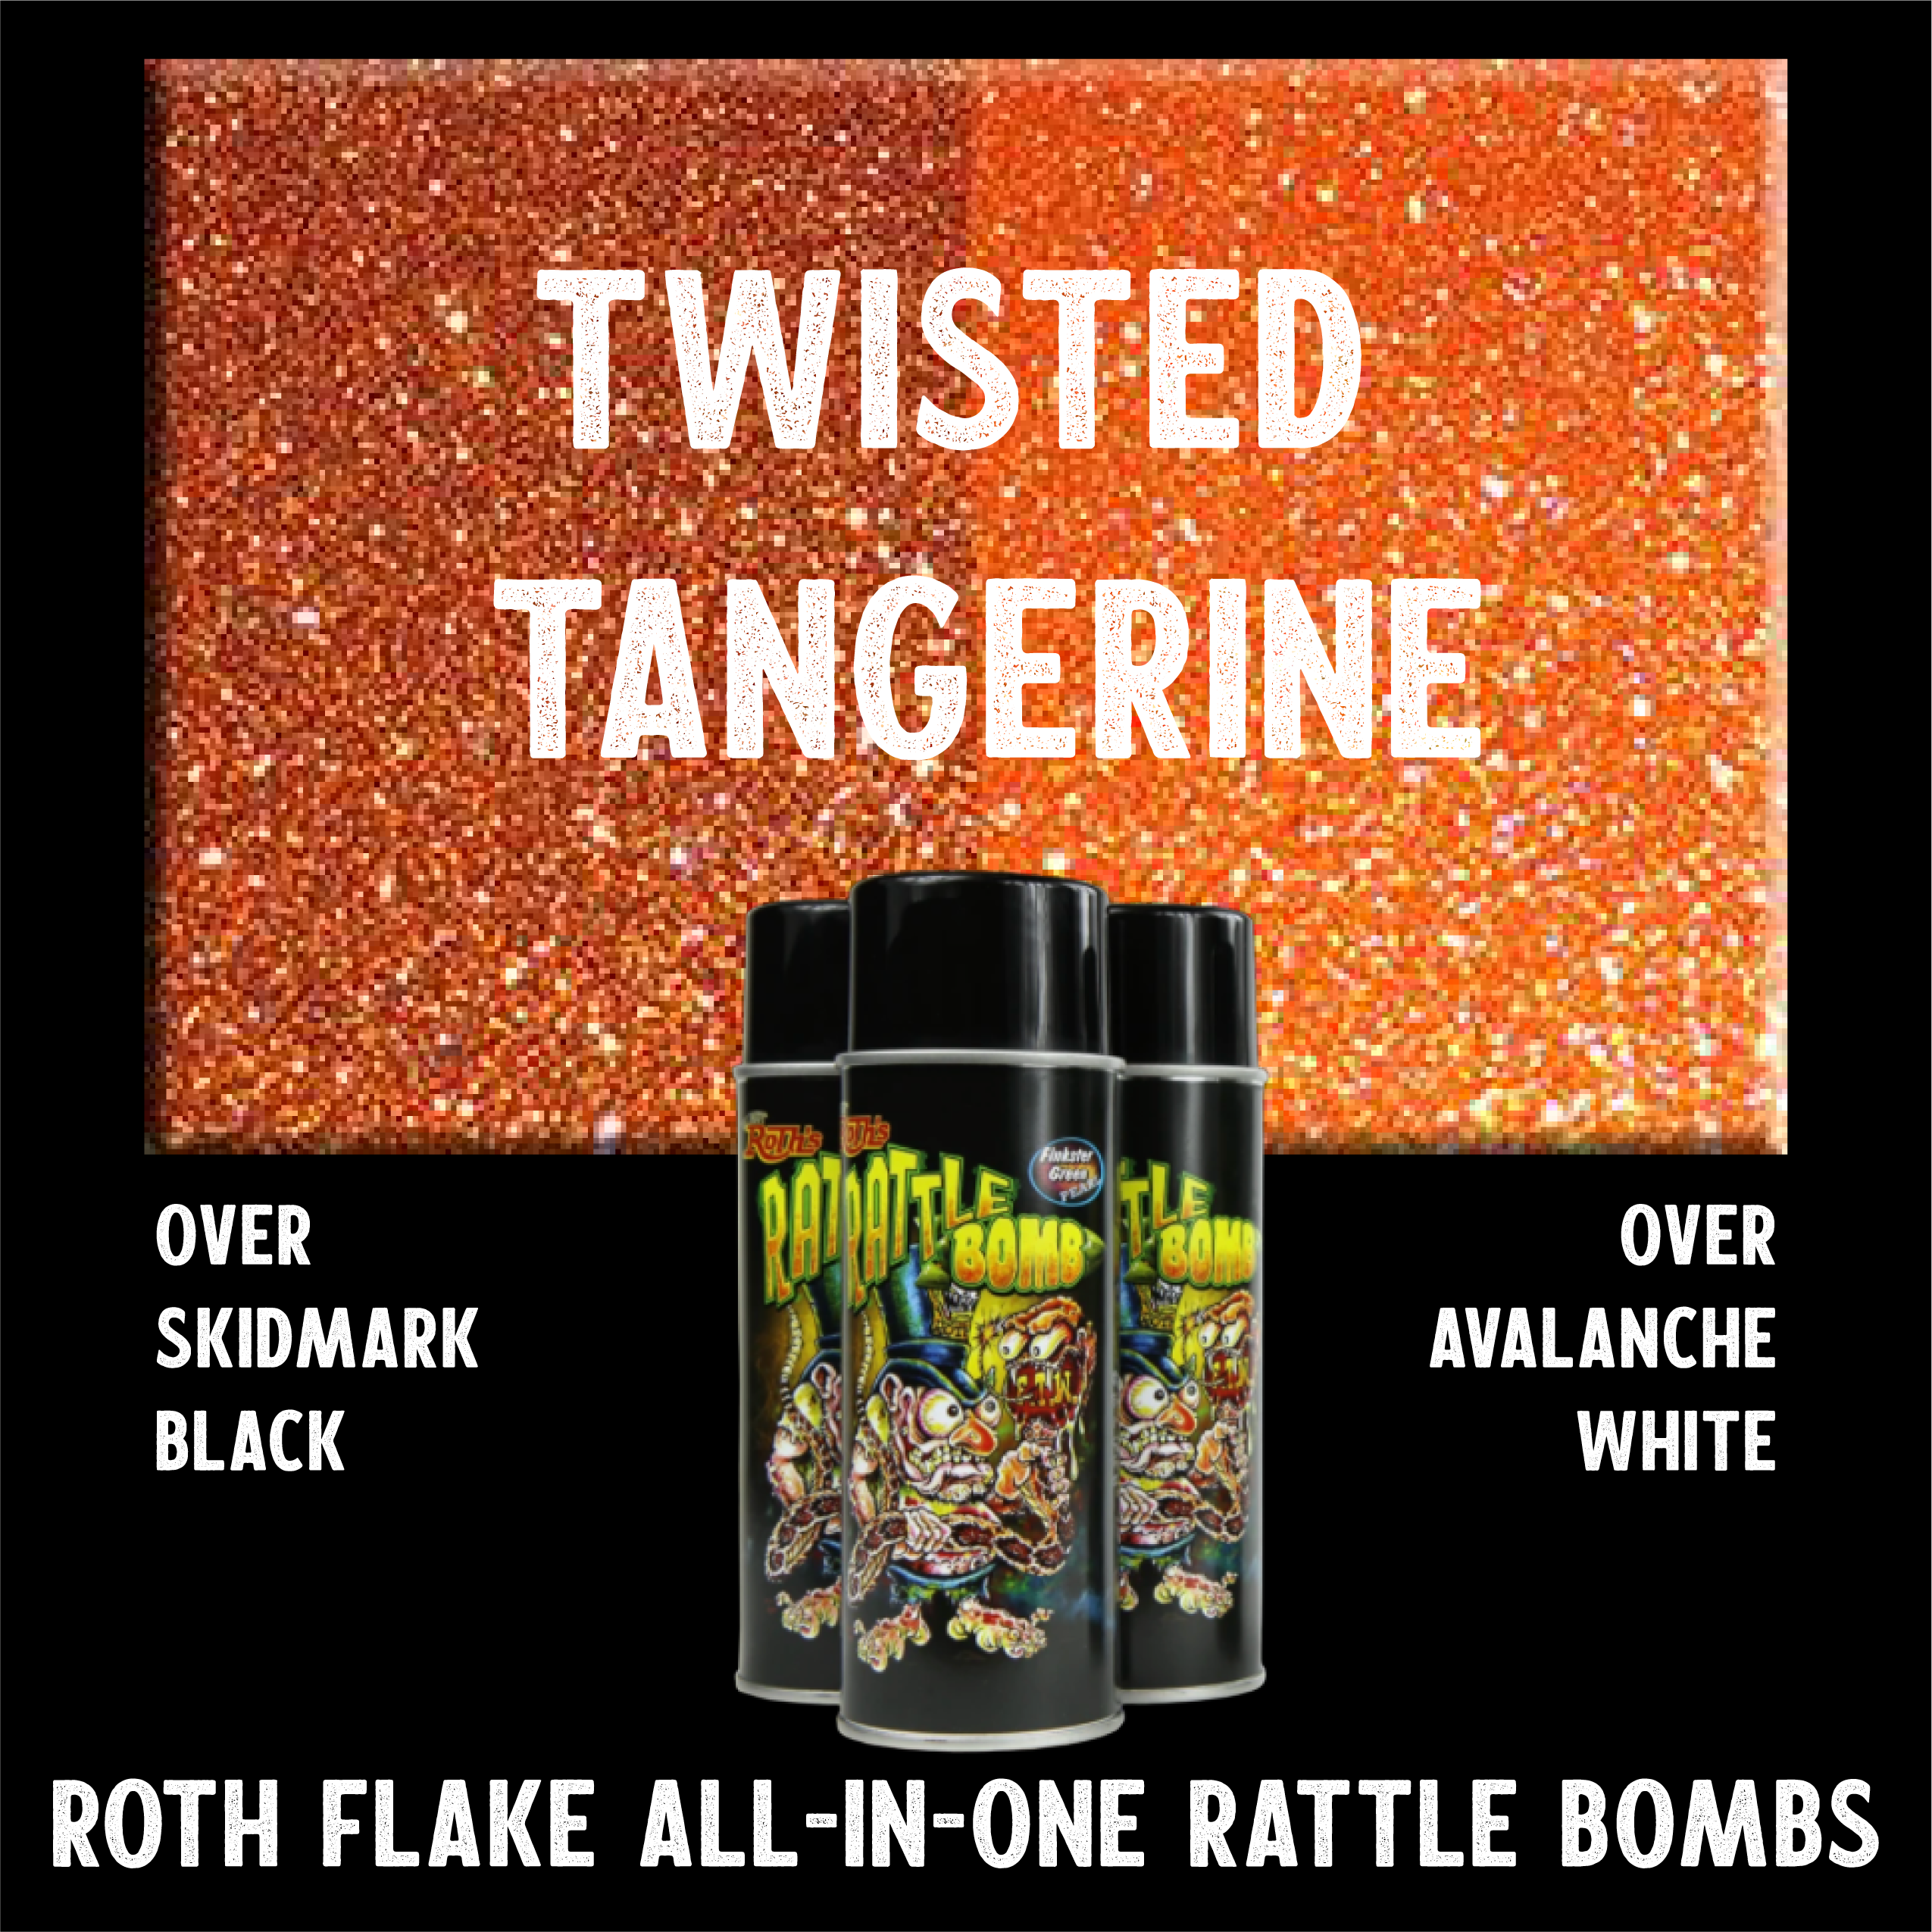 Twisted Tangerine All-In-1 Rattle Bomb!